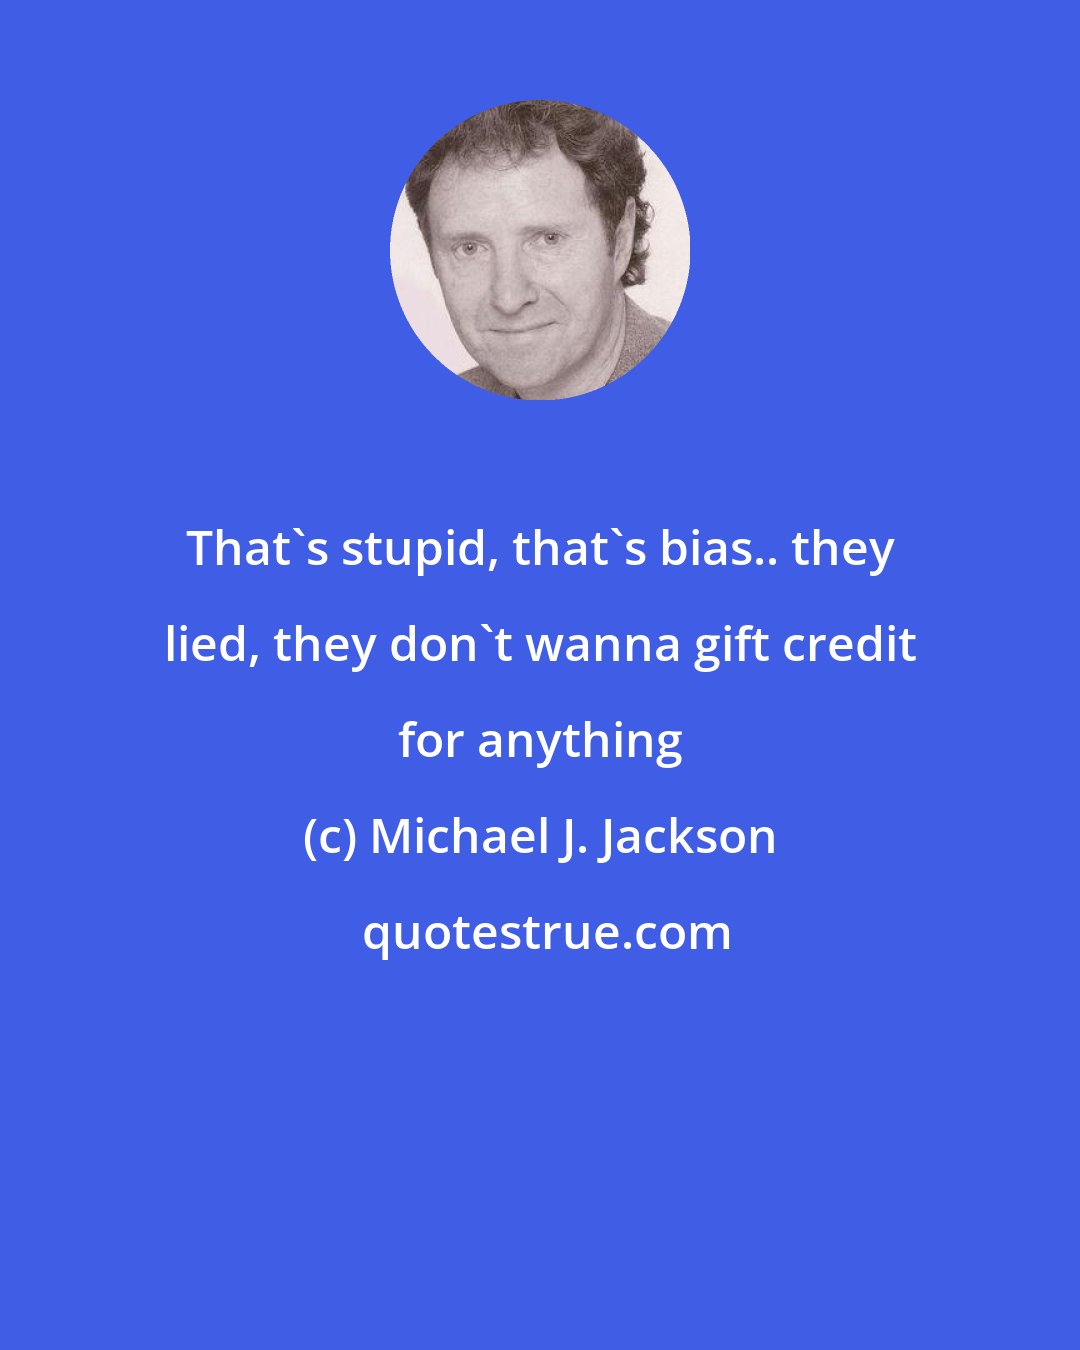 Michael J. Jackson: That's stupid, that's bias.. they lied, they don't wanna gift credit for anything